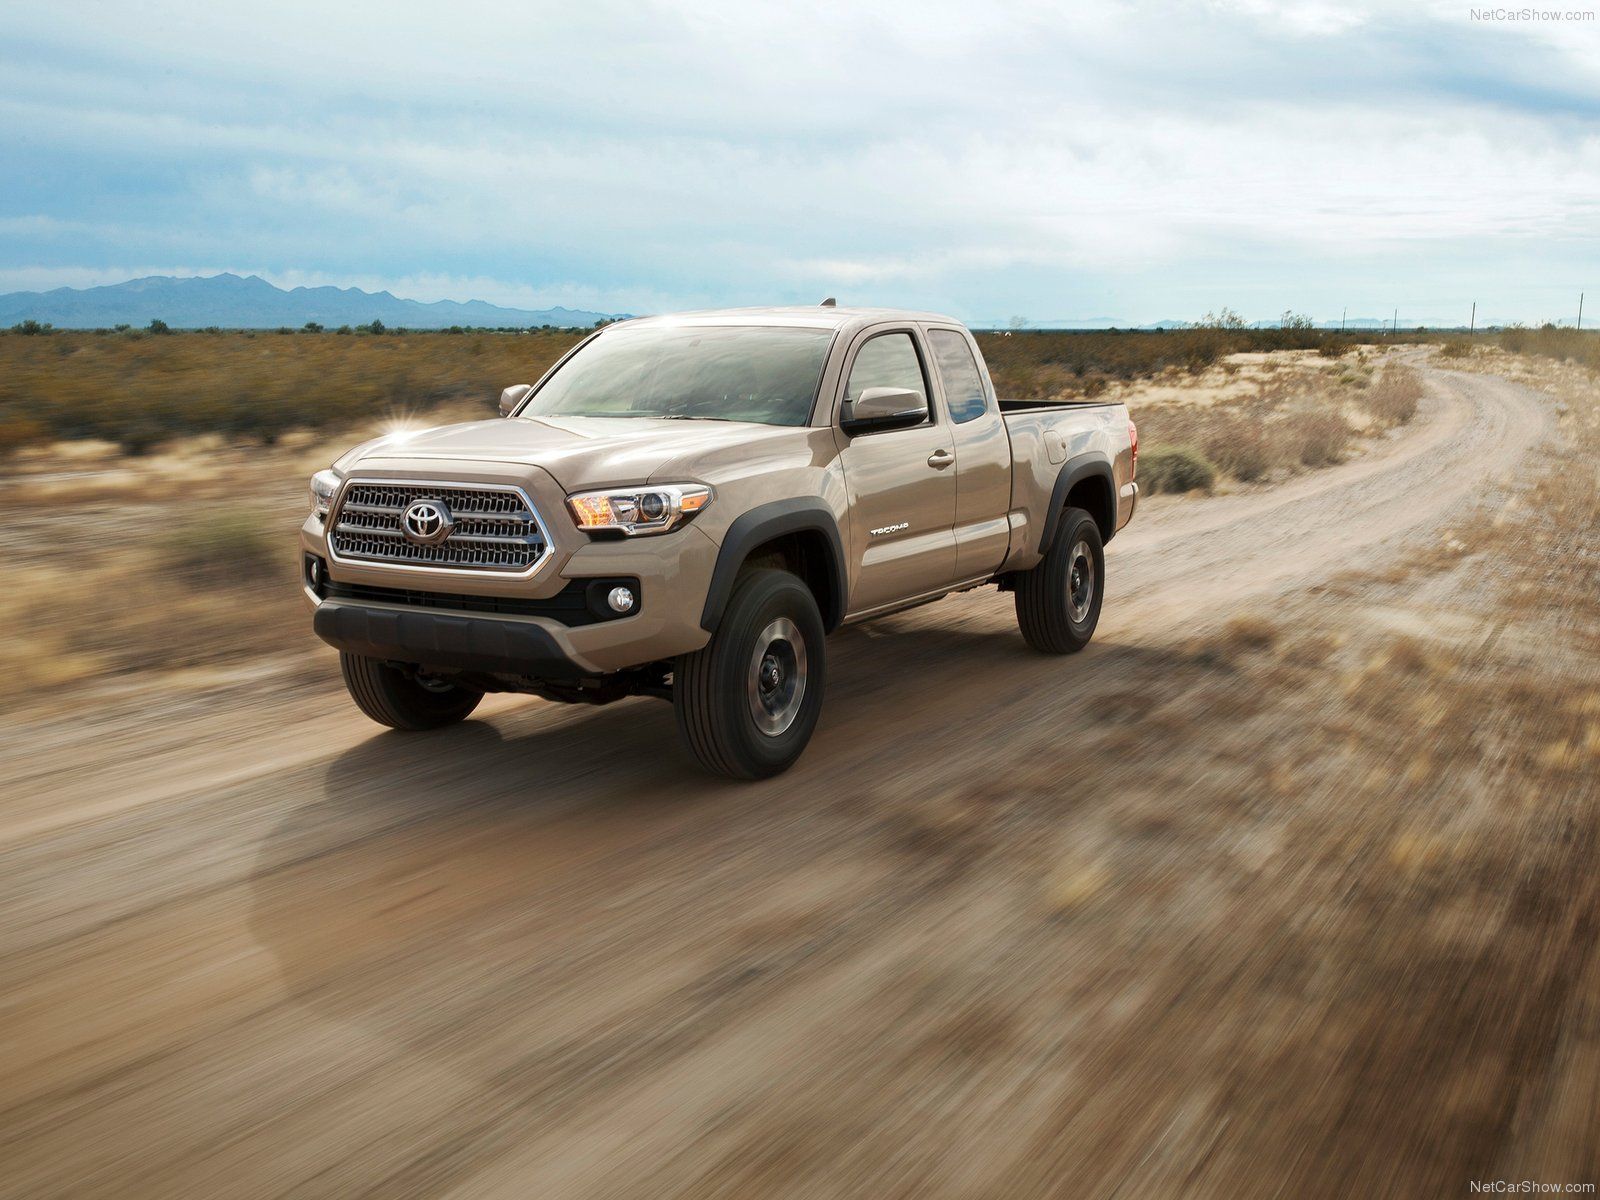 toyota, Tacoma, Trd, Off road, Truck, Pickup, Cars